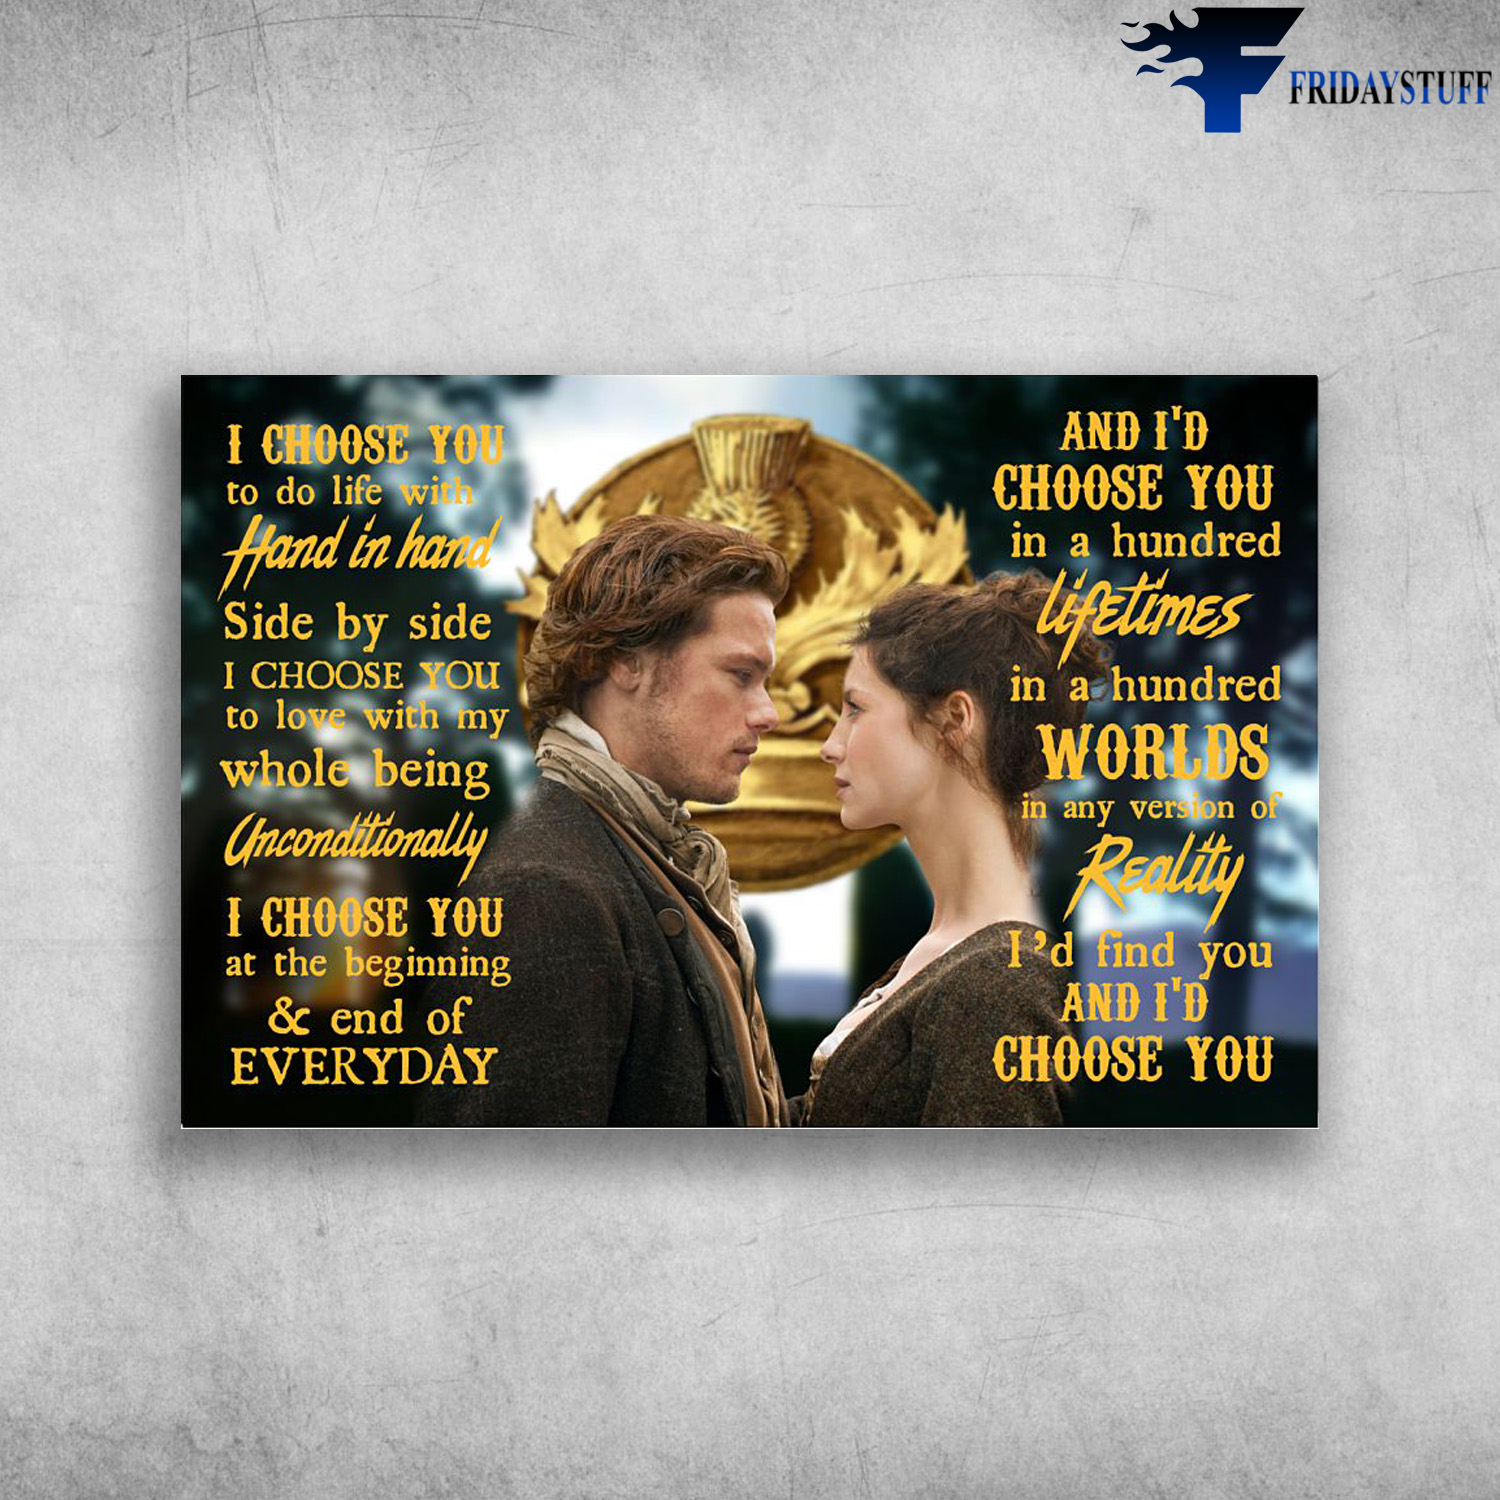 Outlander Movie - I Choose You To Do Life With Hand In Hand, Side By Side, I Choose You To Do Love With My Whole Being Unconditionally, I Choose You At The Beginning And End Of Everyday